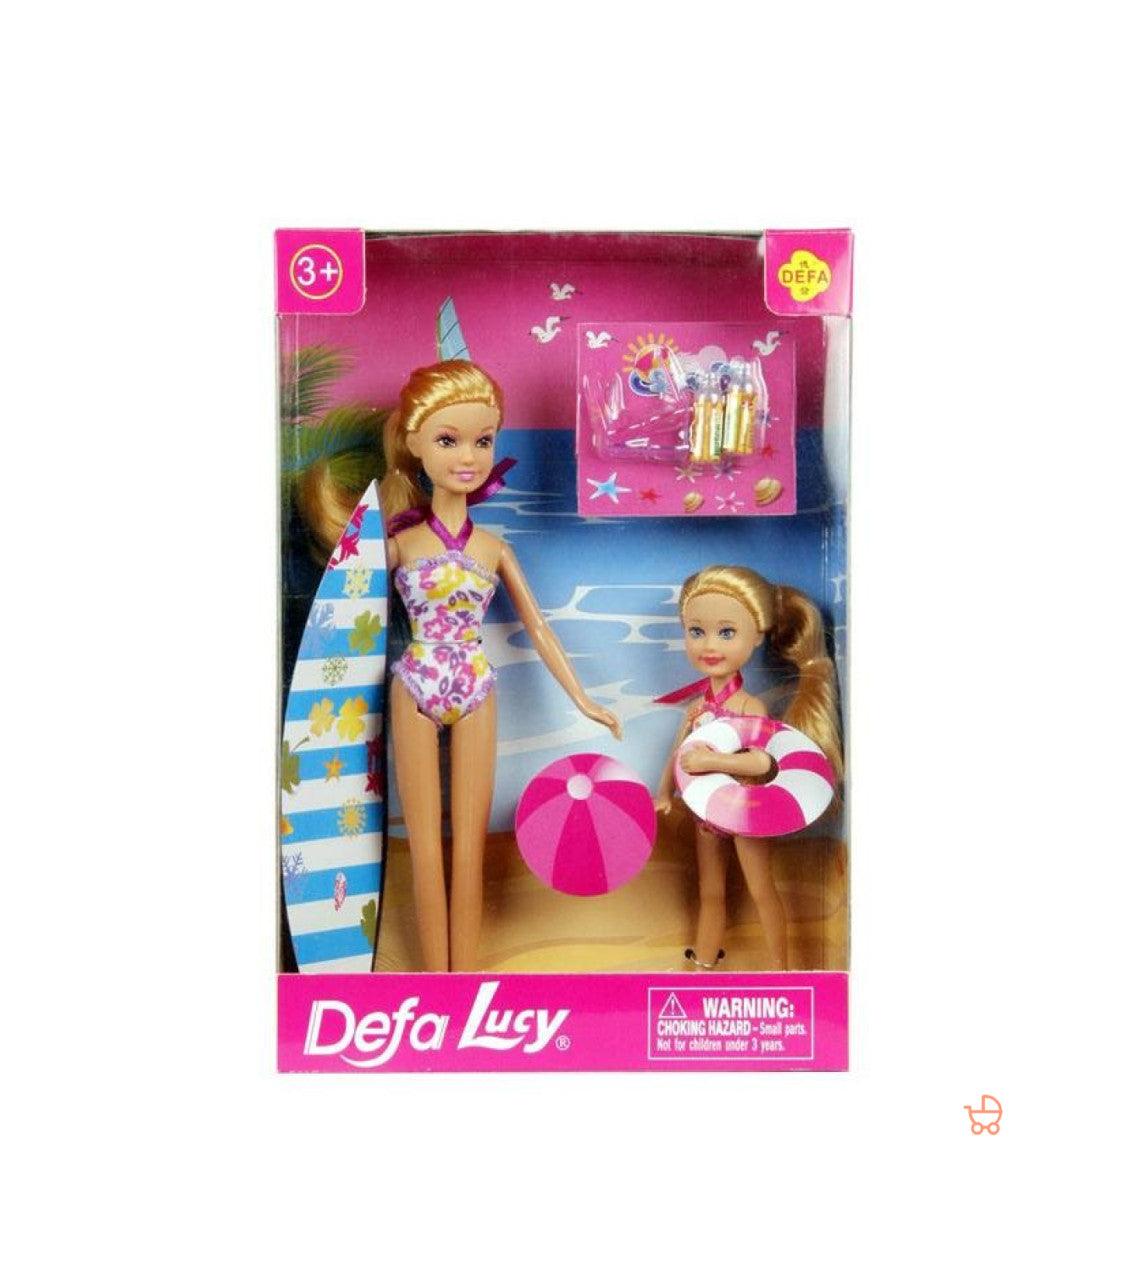 Defa Lucy Doll At The Beach - Ourkids - Defa